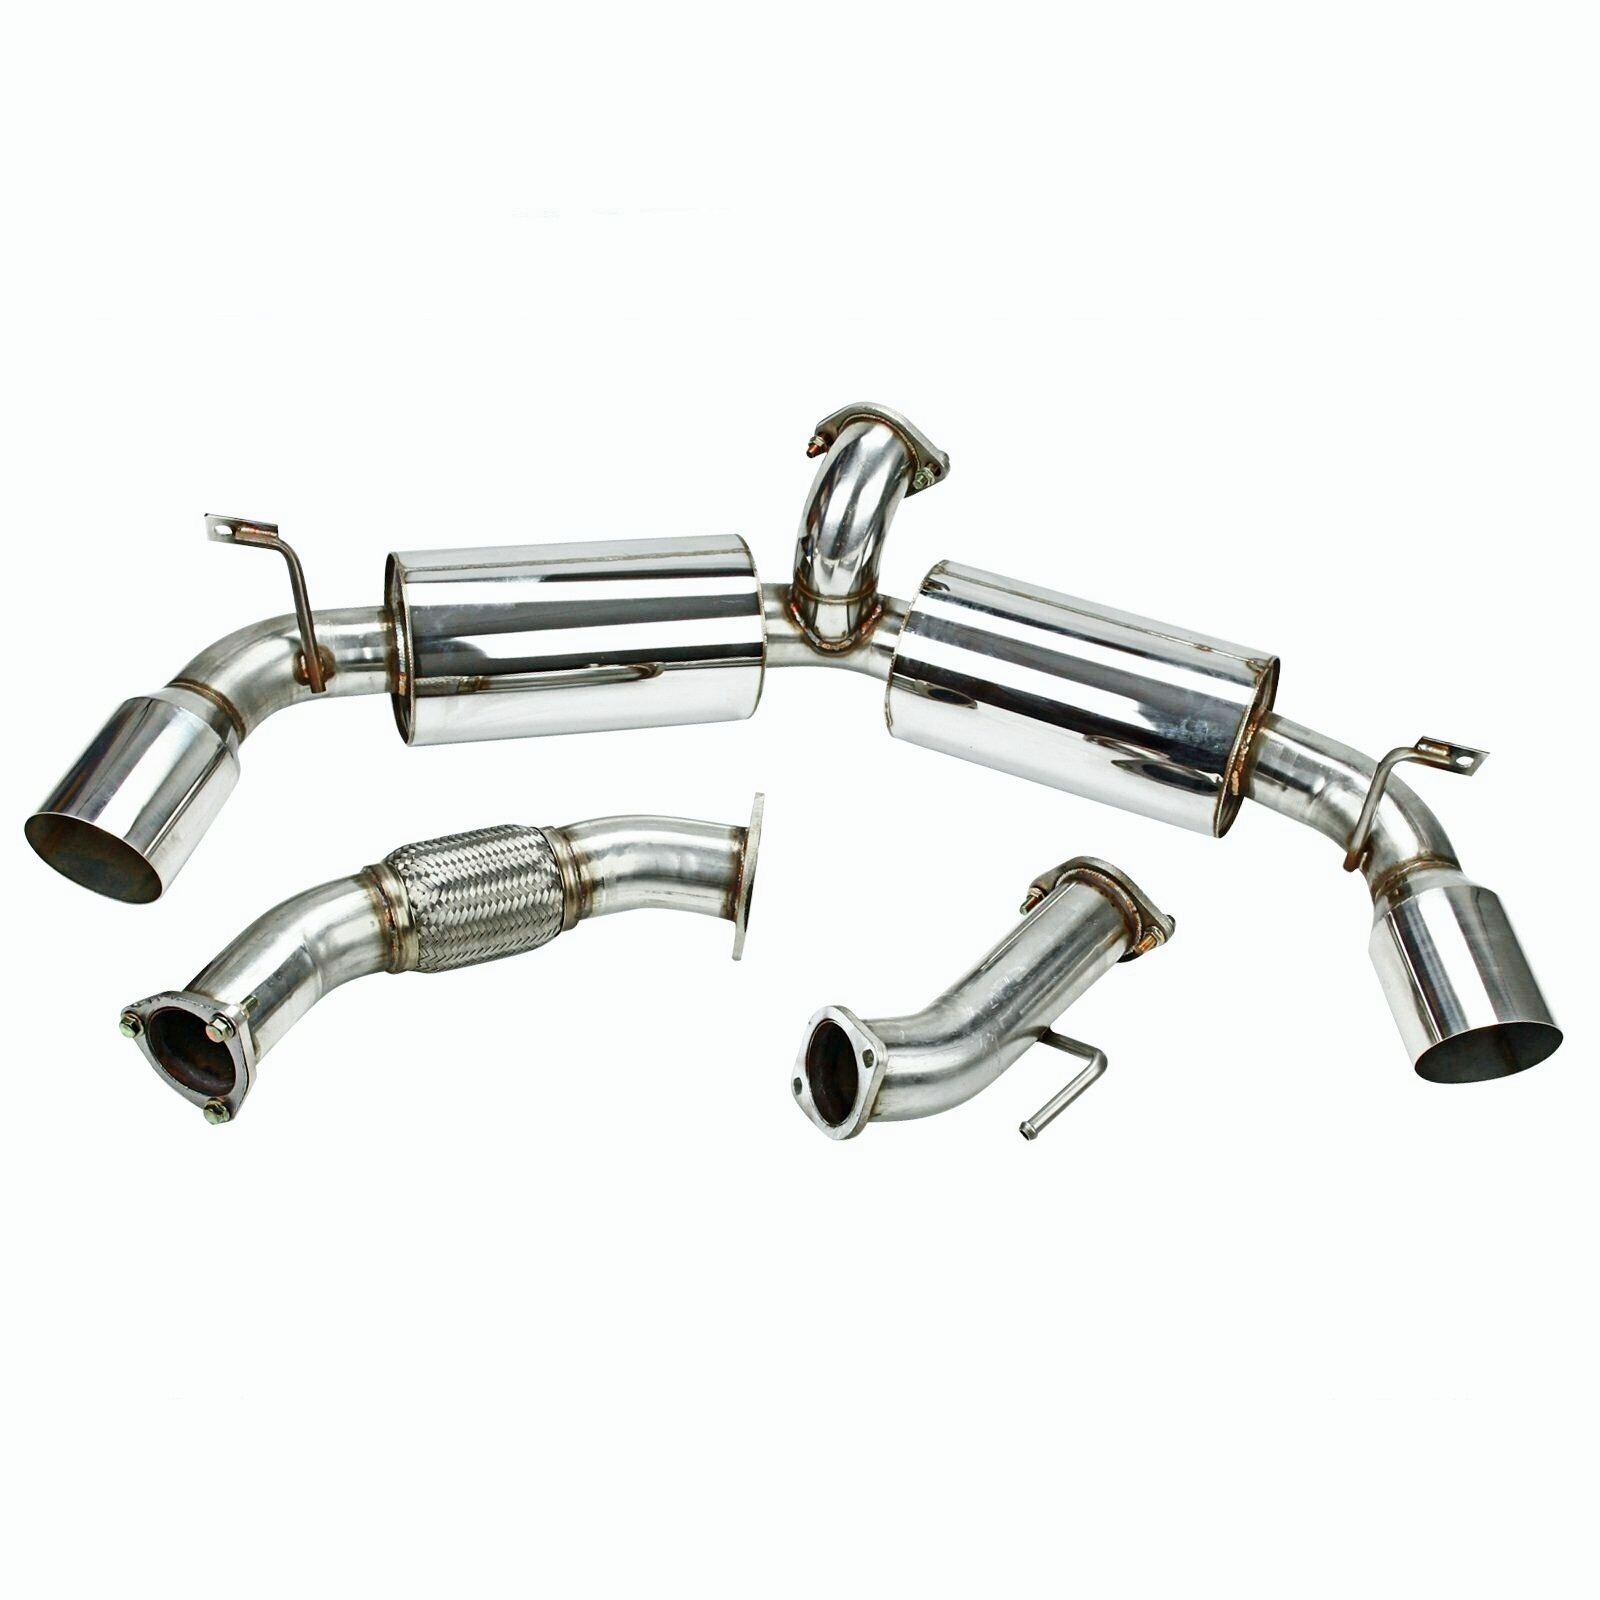 Exhaust Cat Back For 91-95 MR2 Turbo 2.0L SW20 4.5''Dual Burnt Tip Muffler Catback Exhaust System